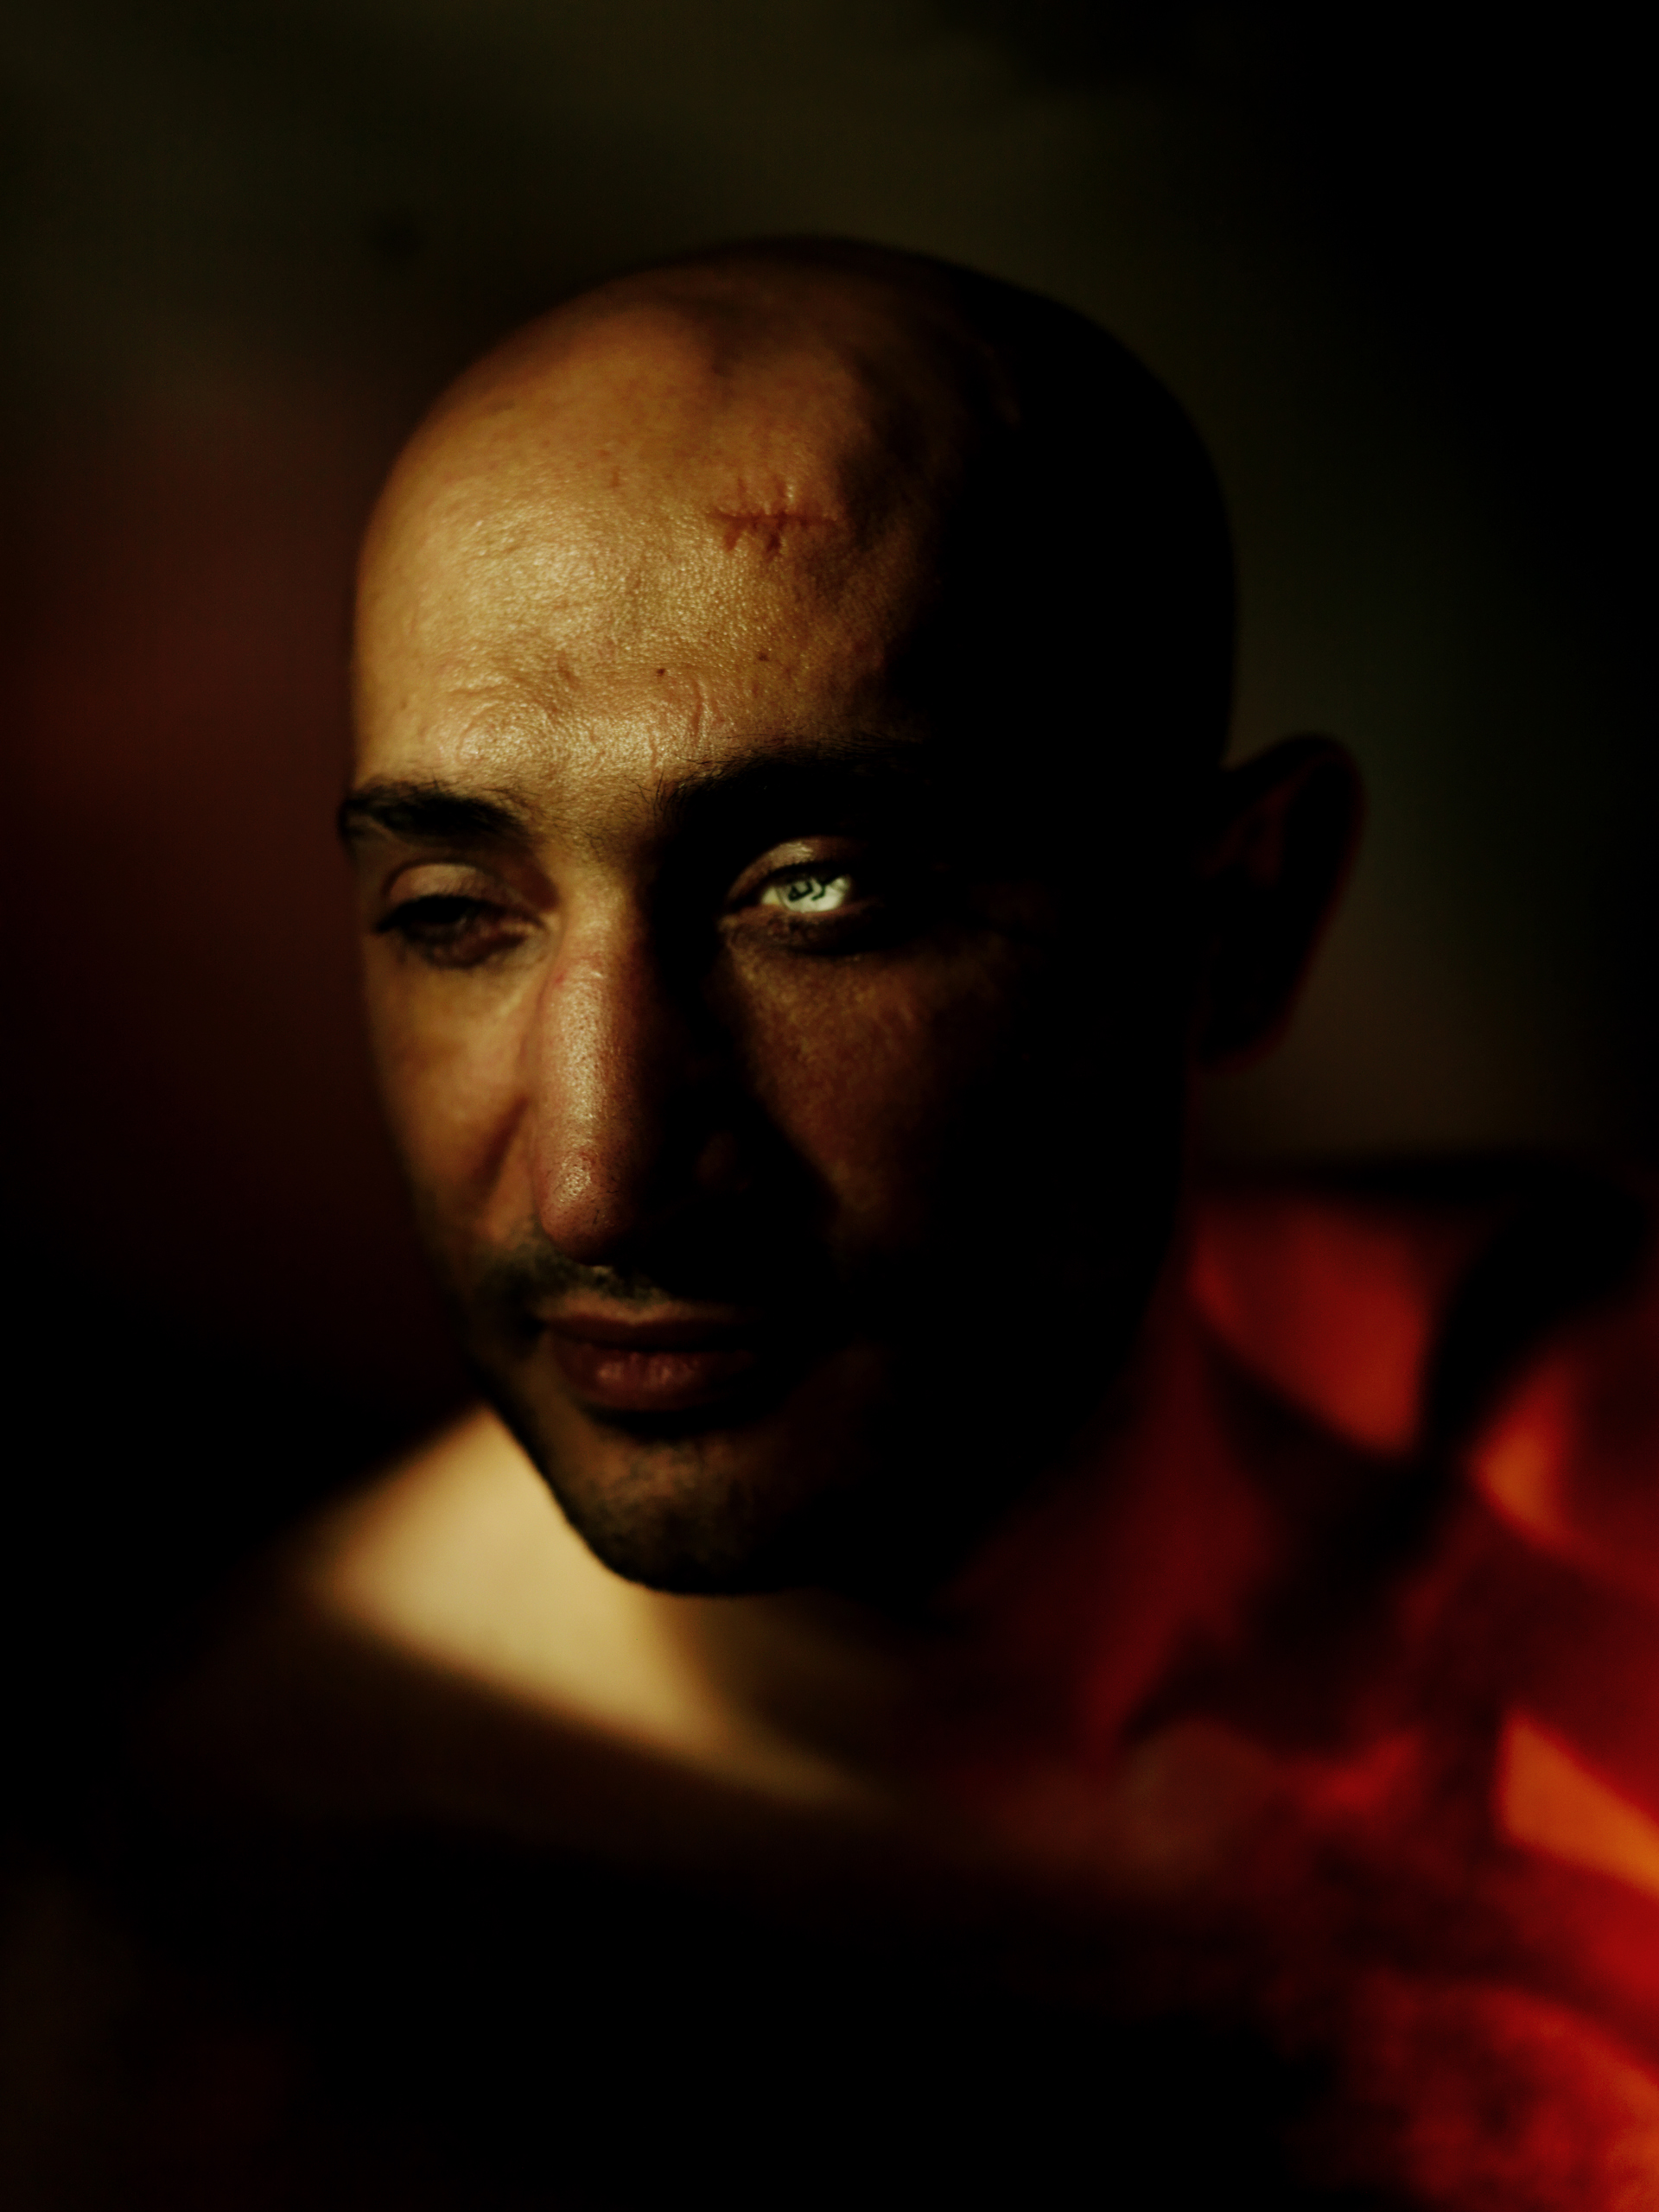 Ahmed Hararah, poses with his left emptied socket, wearing a glass eye on which is written in Arabic, 'Horreya' or 'freedom.' He lost both of his eyes fighting for the revolution. Cairo, Egypt, Oct. 28, 2015.